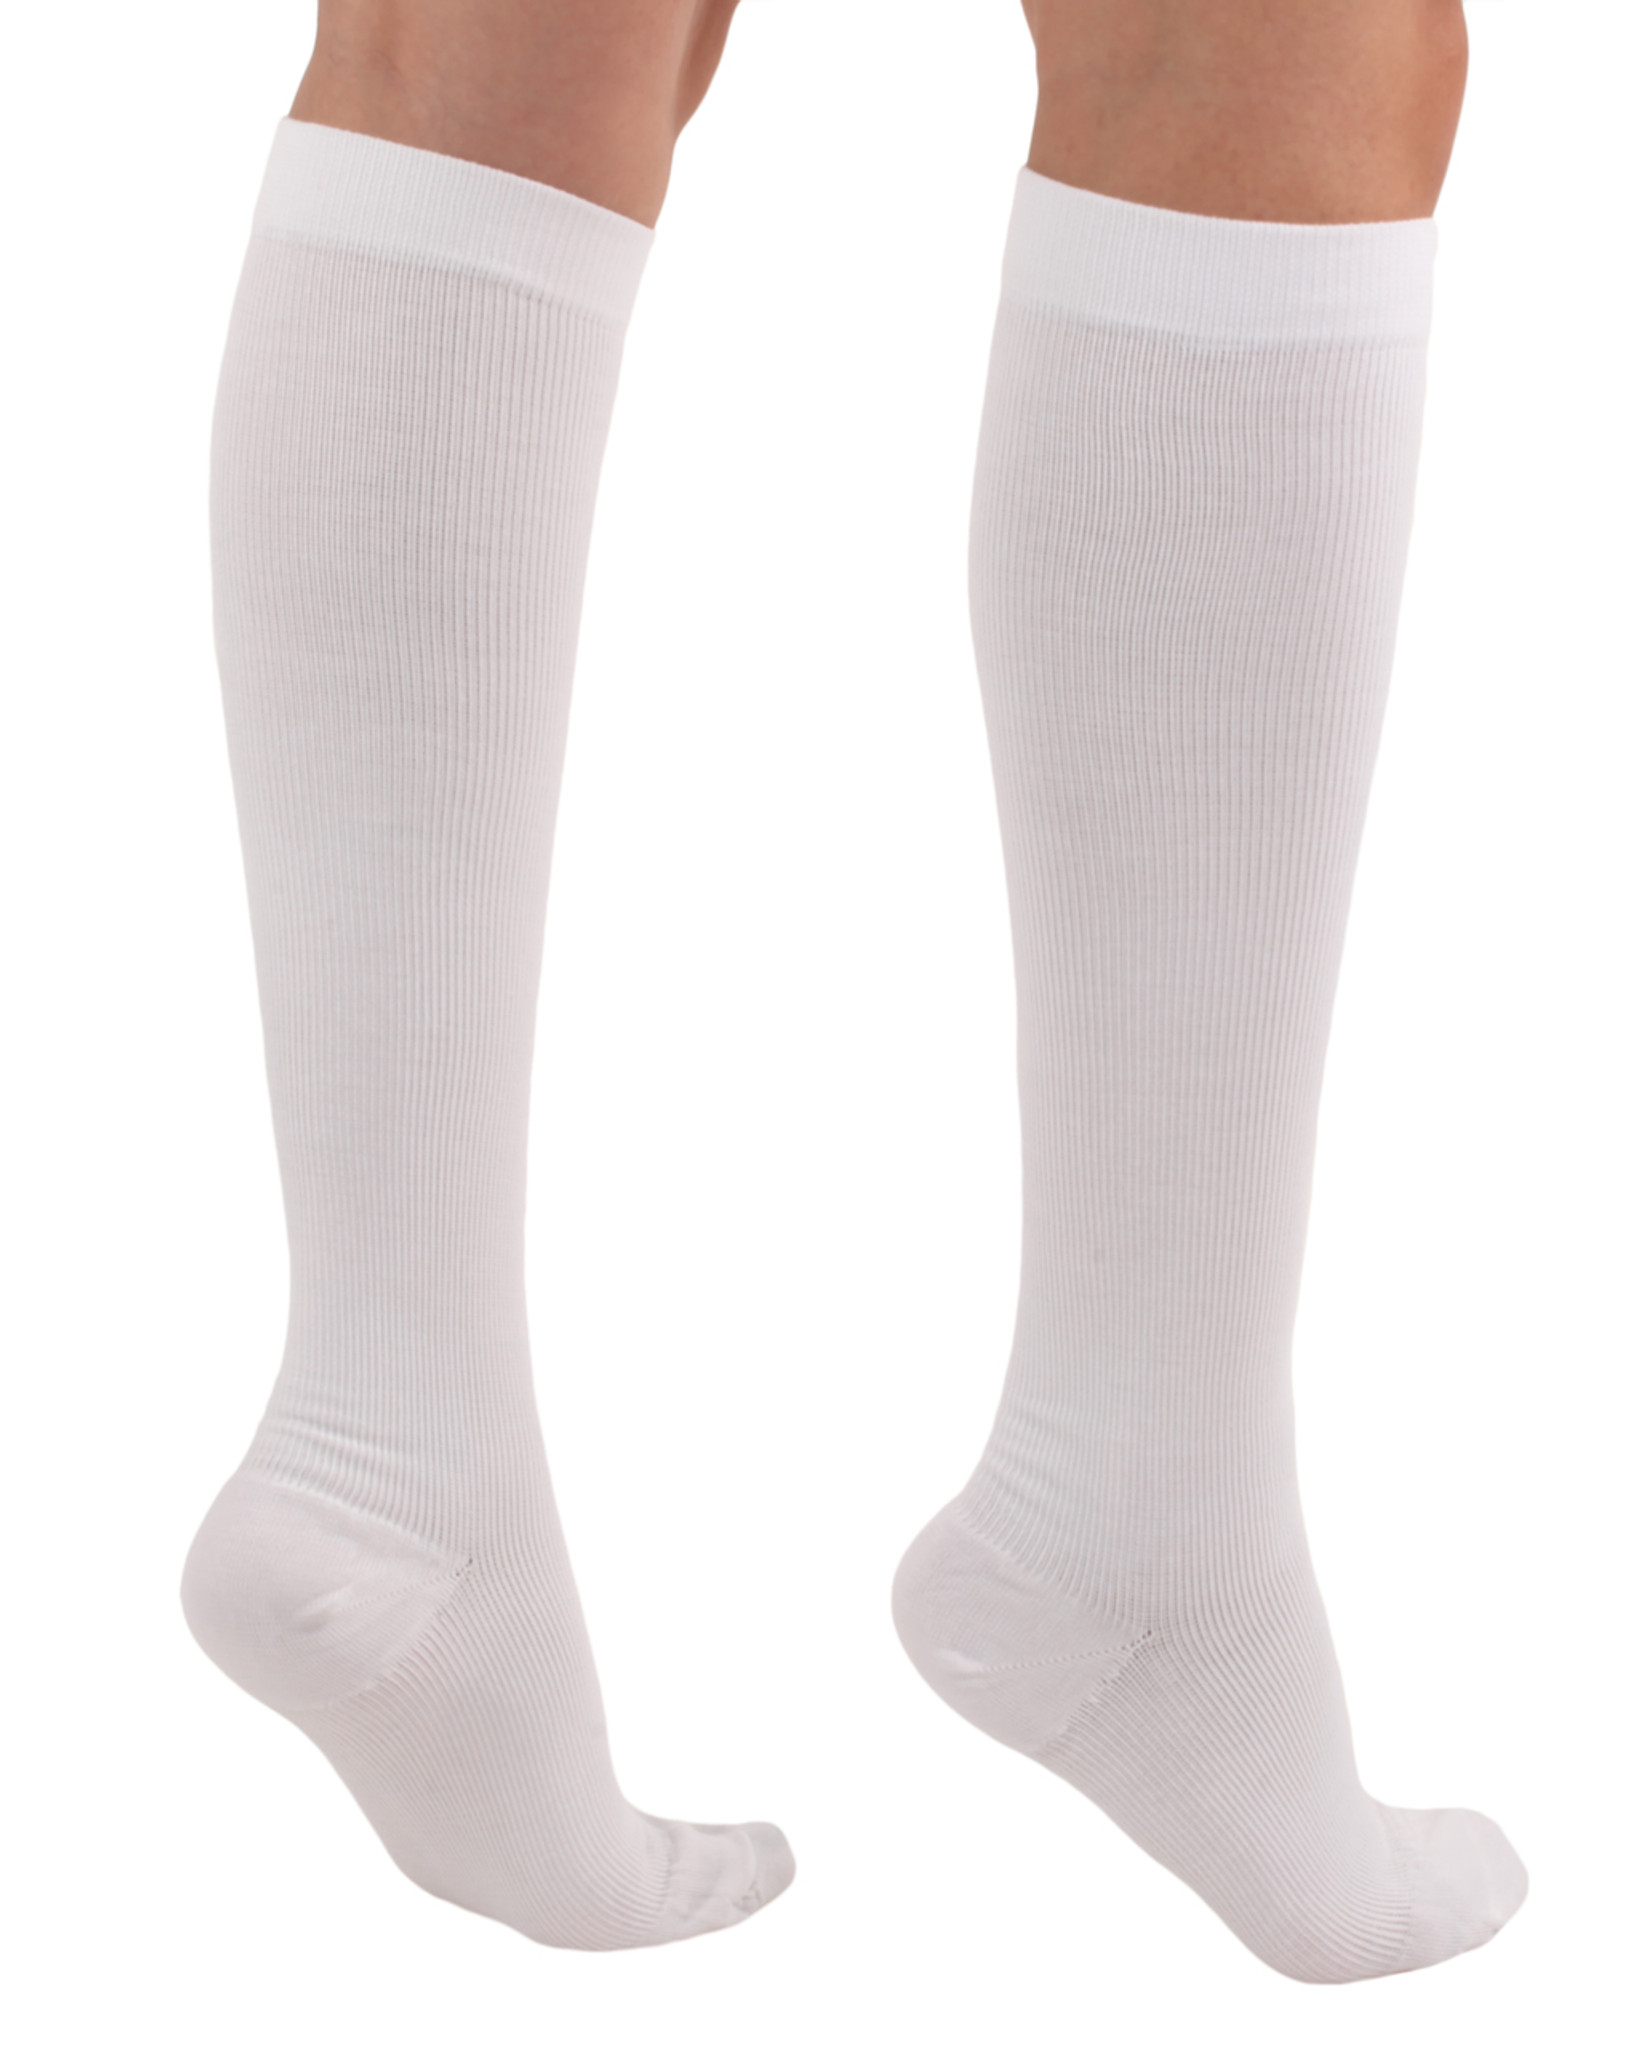 A105 - Mojo Unisex Cotton Compression Socks Firm Support